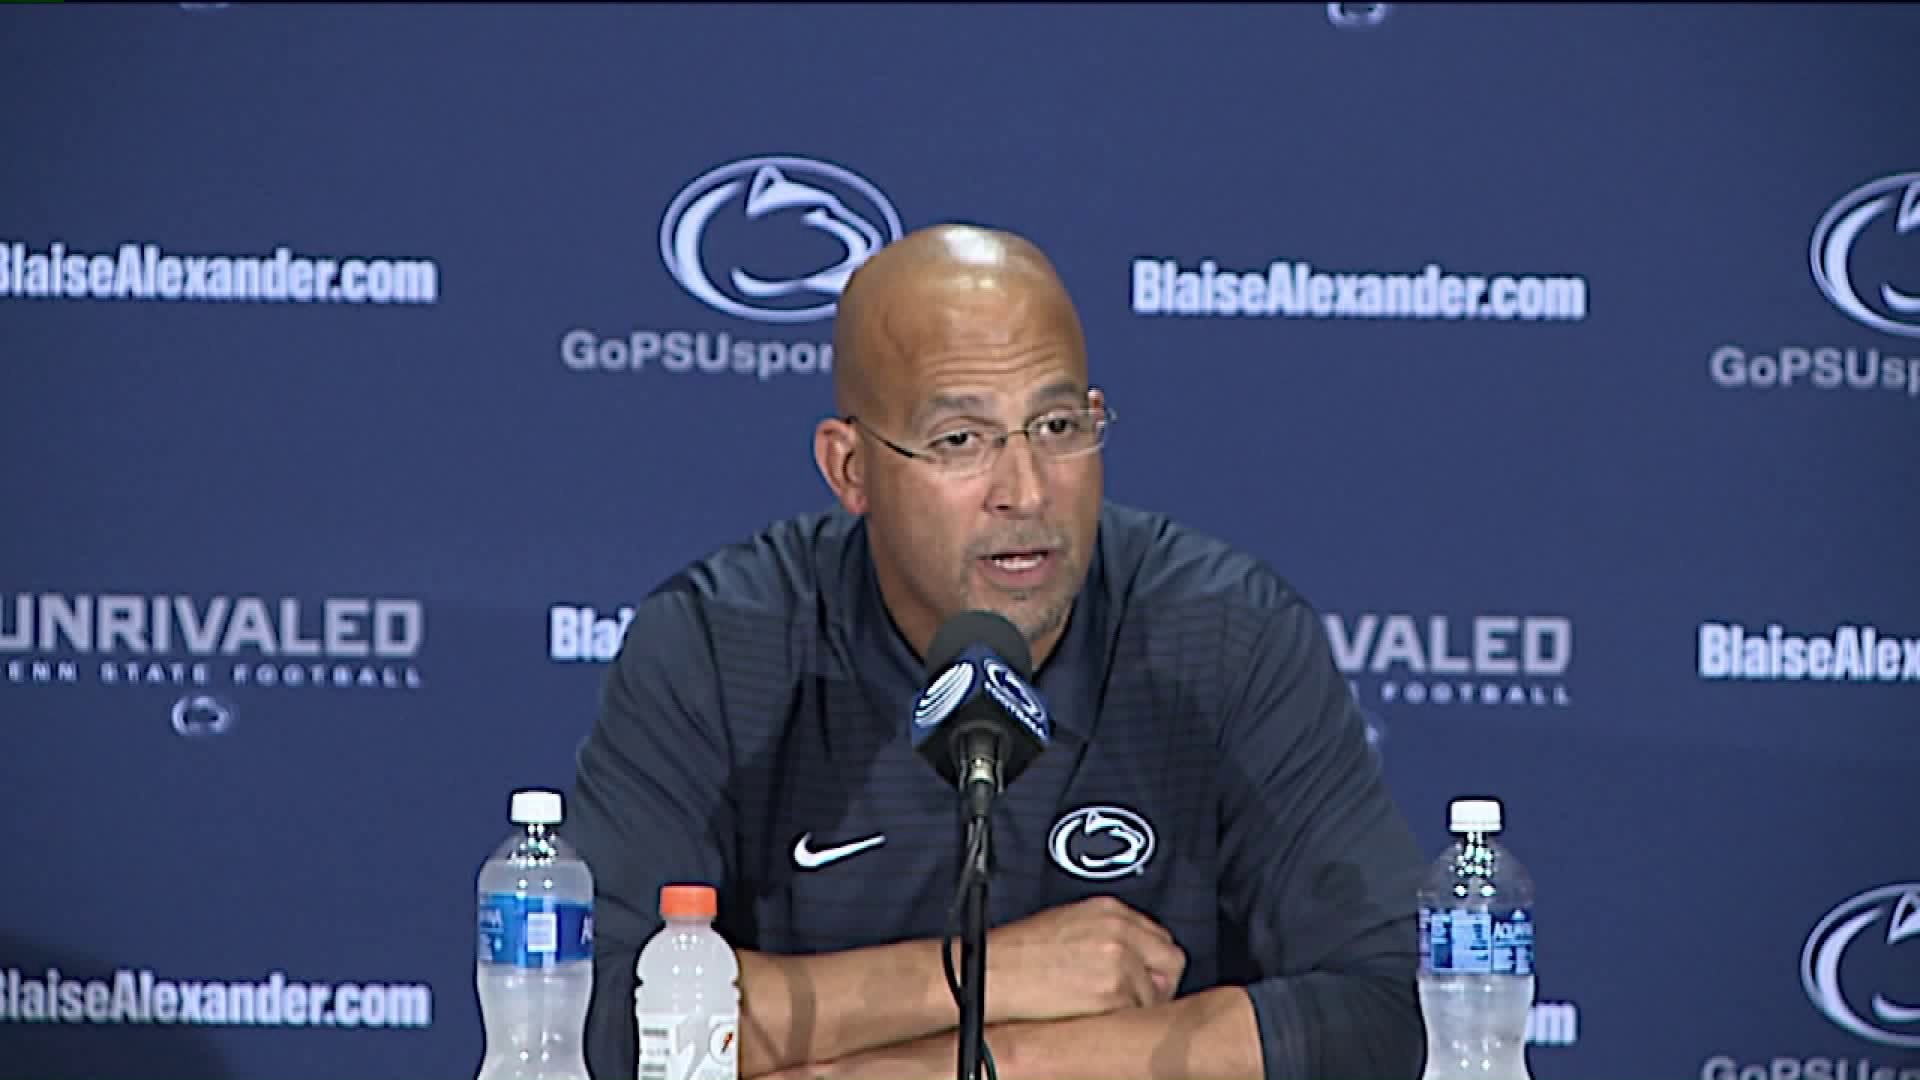 James Franklin Likens Beating Pitt to Beating Akron